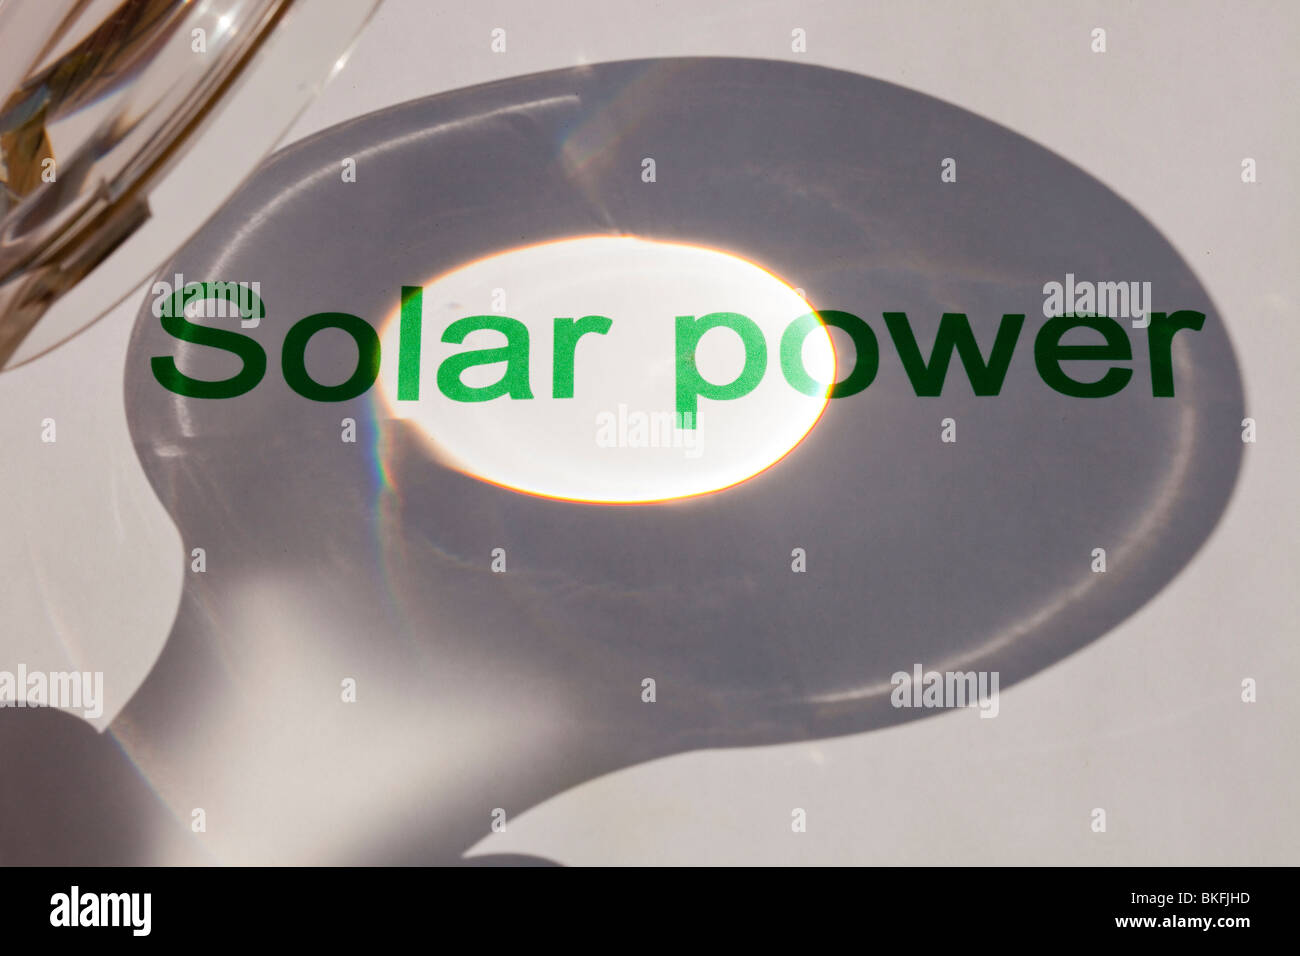 Solar power, concentrating the suns power through a magnfying glass. Stock Photo